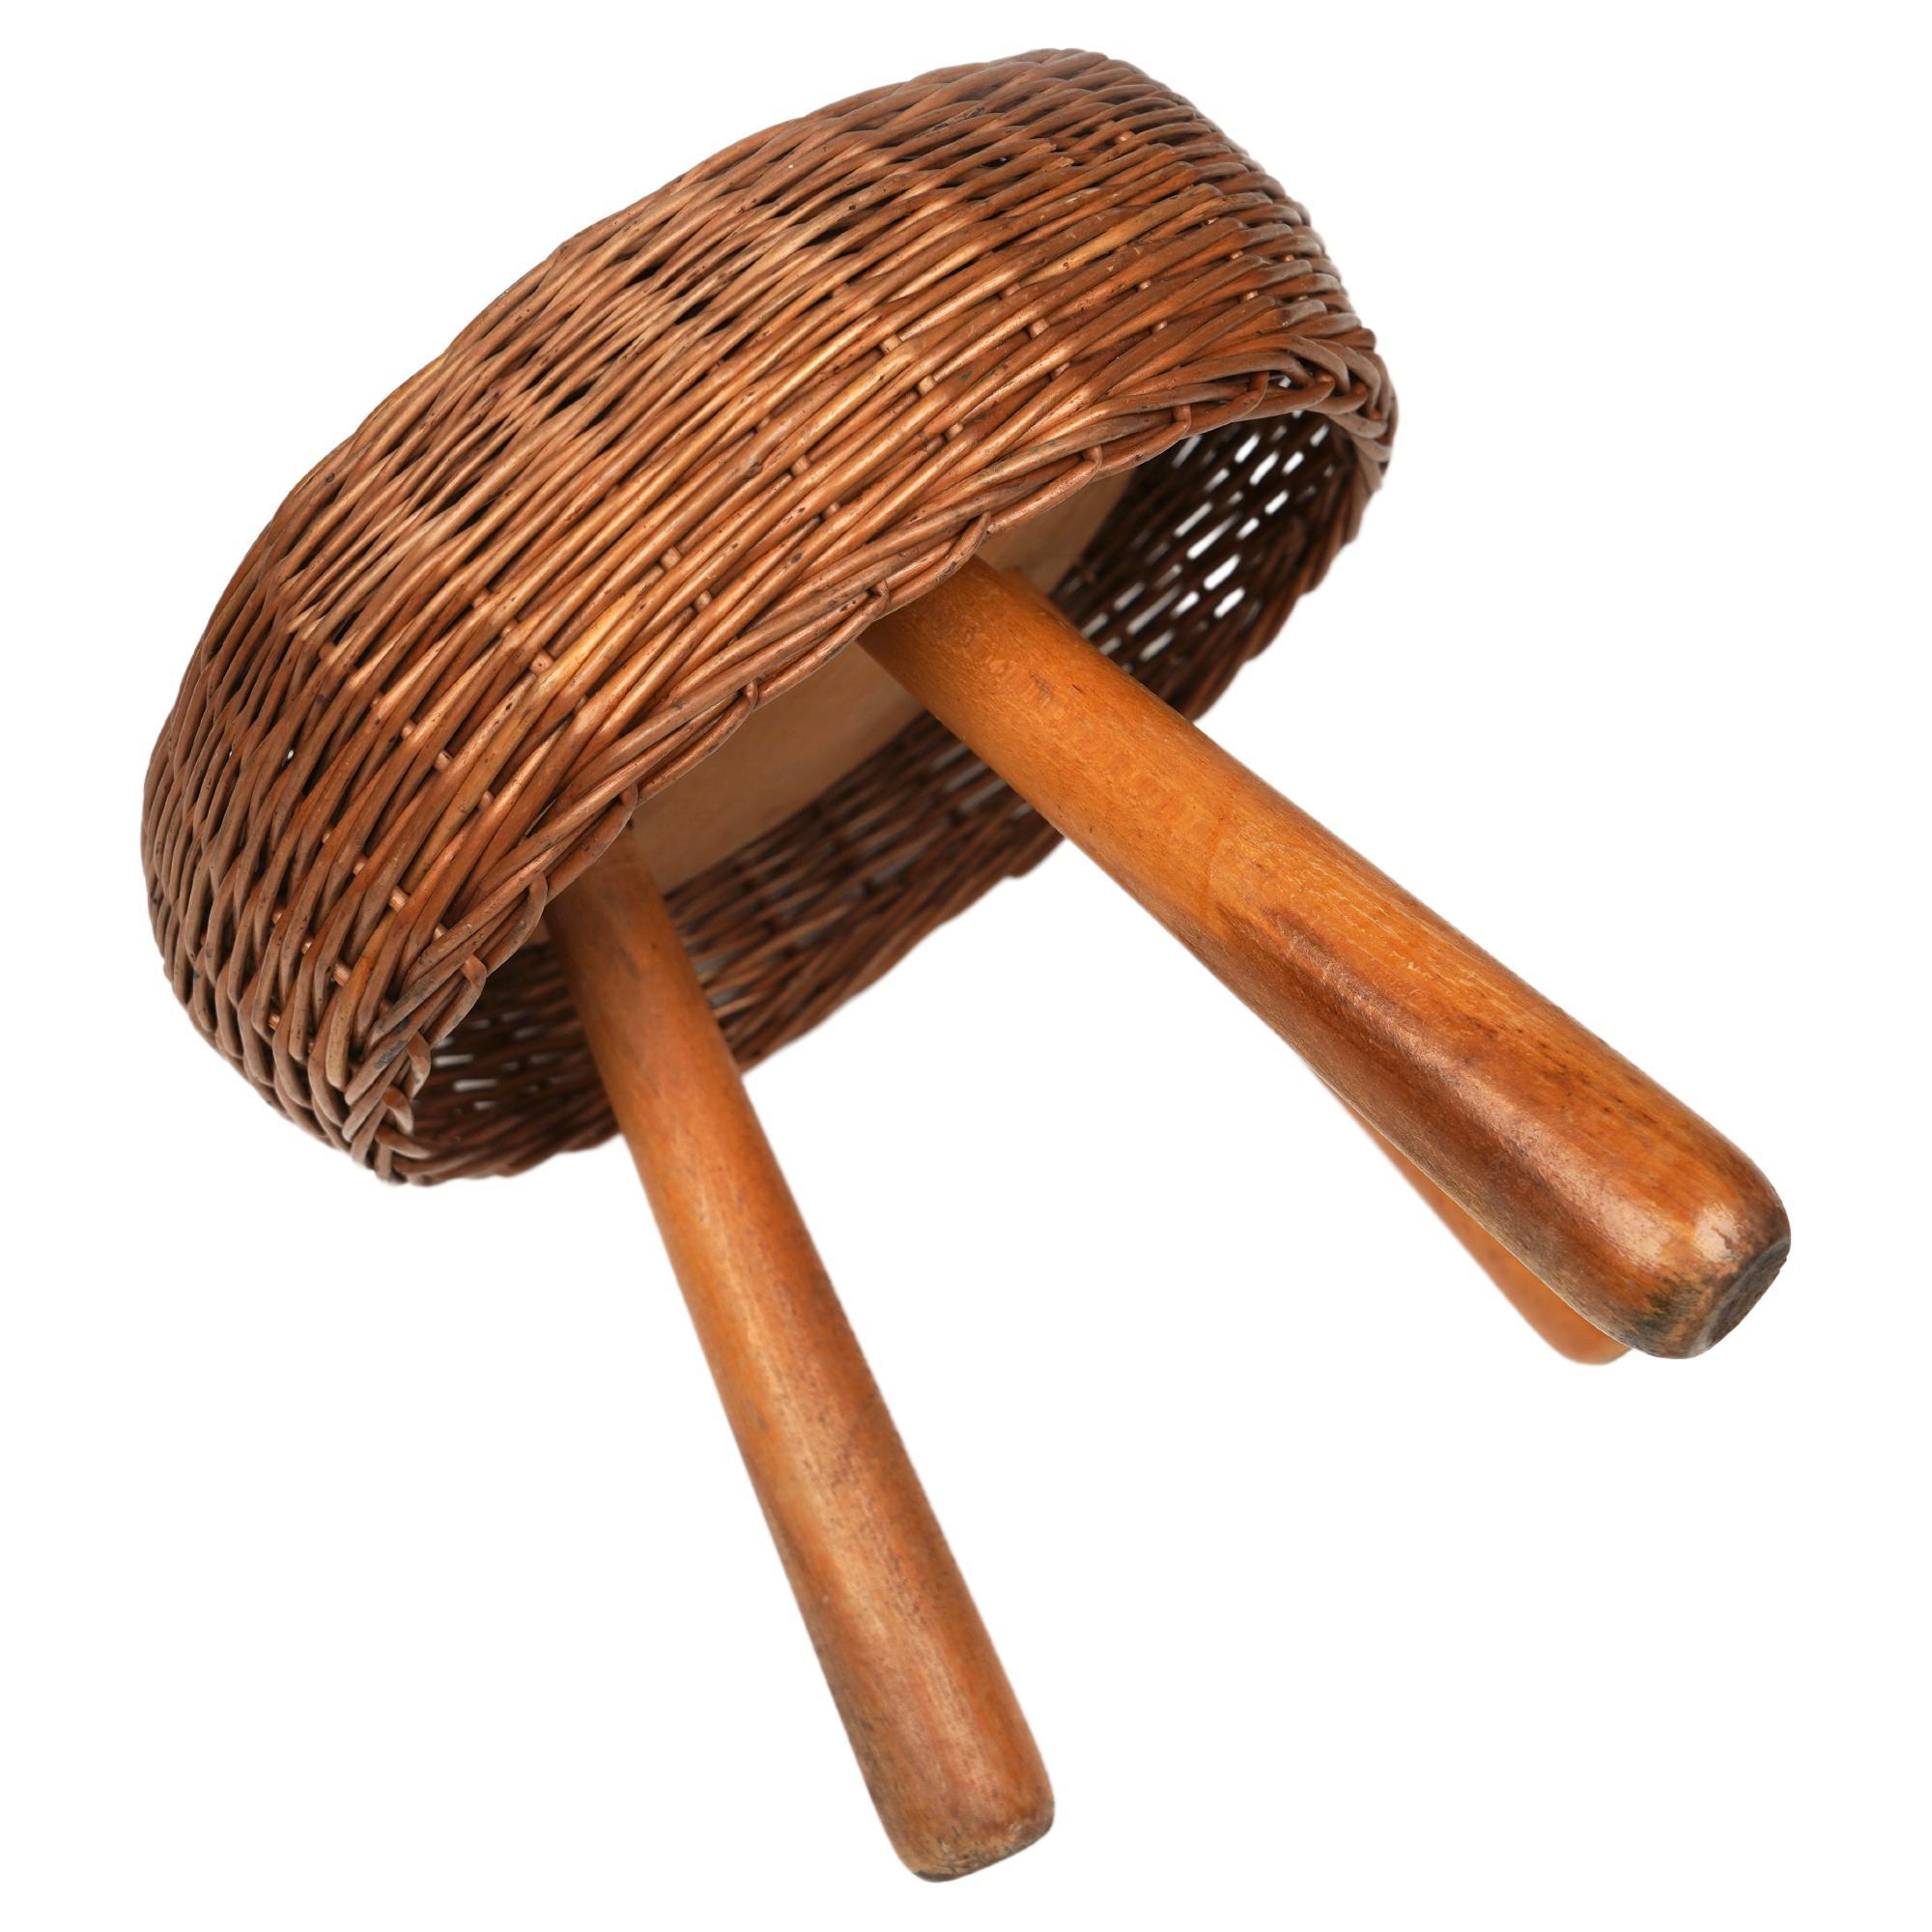 Midcentury Wicker and Wood Tripod Stool by Tony Paul, United States, 1950s For Sale 3